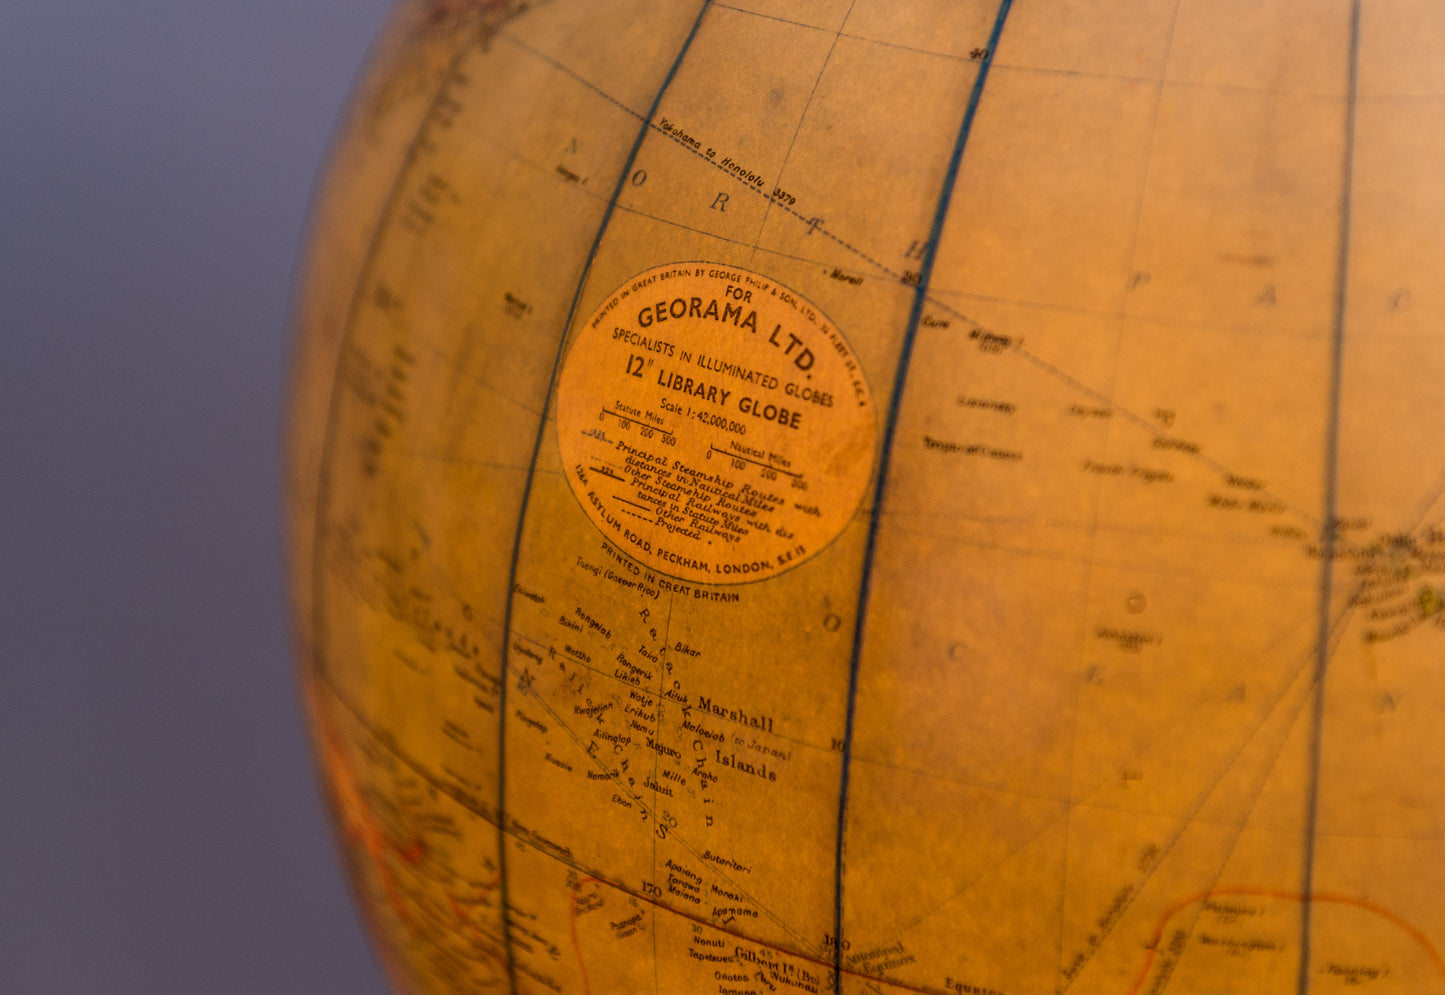 Illuminated Georama 12inch Library Globe By George Philip's & Sons. London England 1930'S